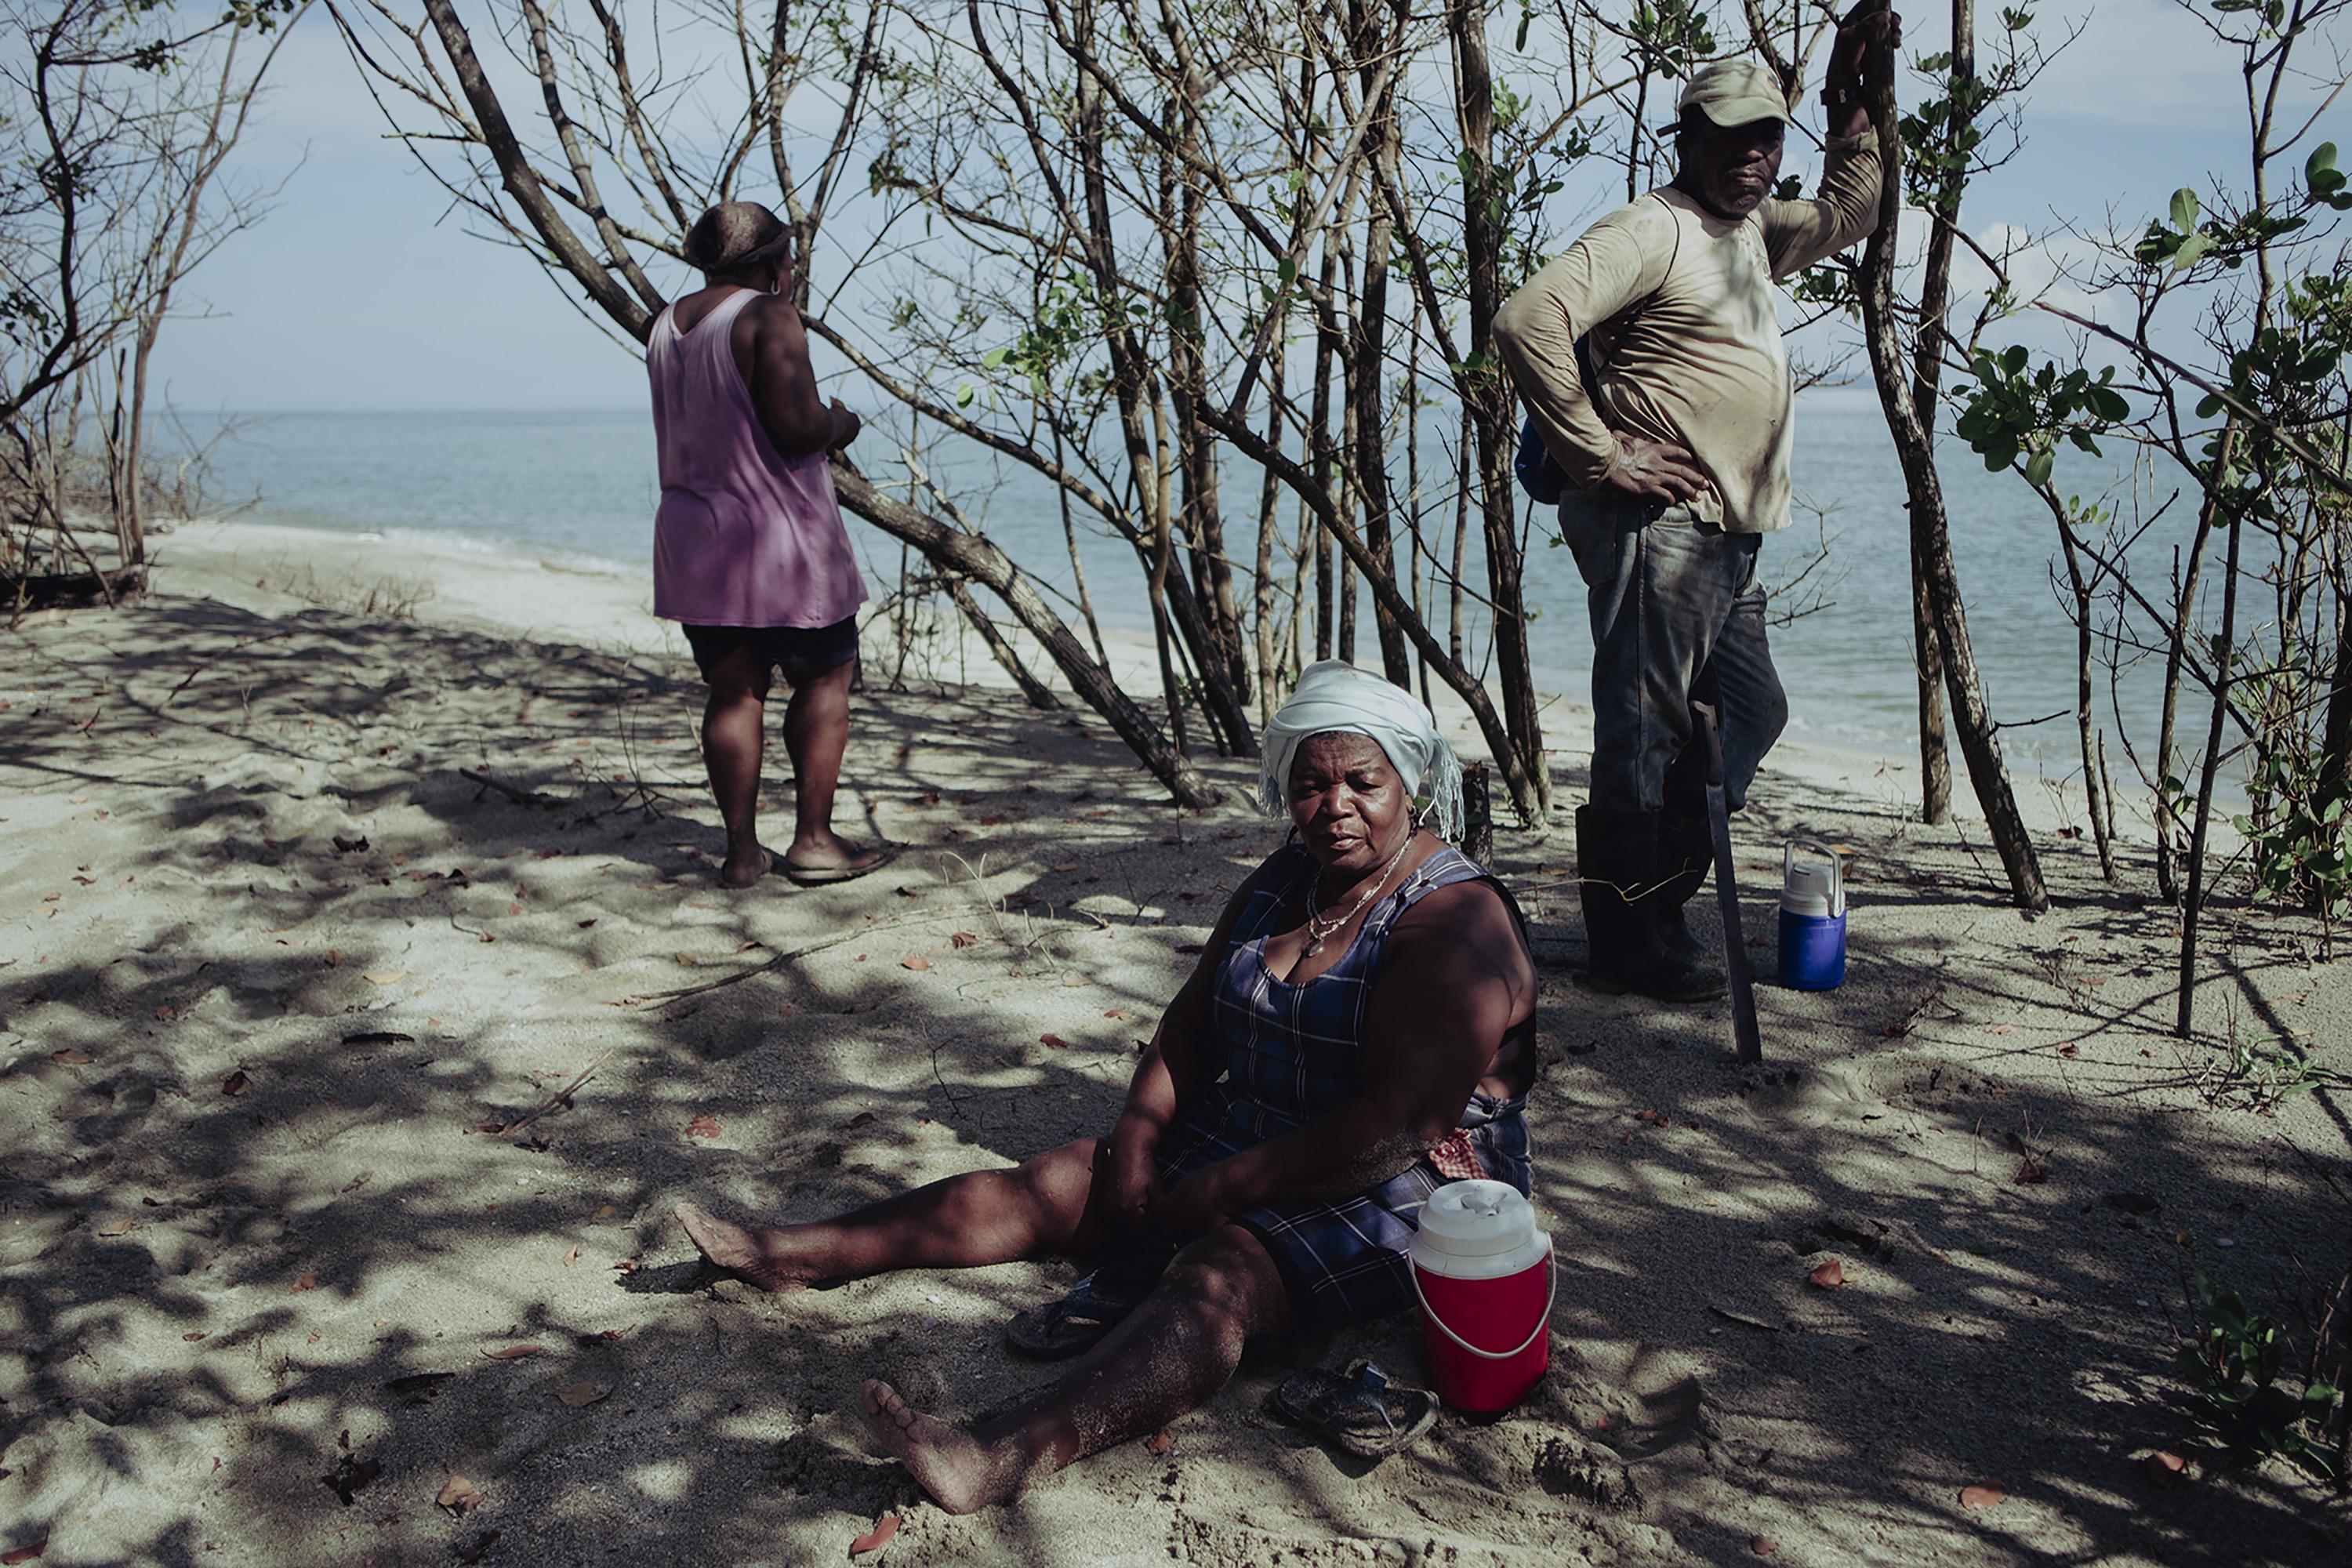 Justa Robledo (middle), María Robledo, and Víctor Sacasa take a break on the beach known as Africa in Nueva Armenia during the community’s morning labors to gather wood. Communal work has galvanized the Garifuna locals, helping them recover land stolen from them in the 1990s. “There is still more territory left to recover,” says Justa.